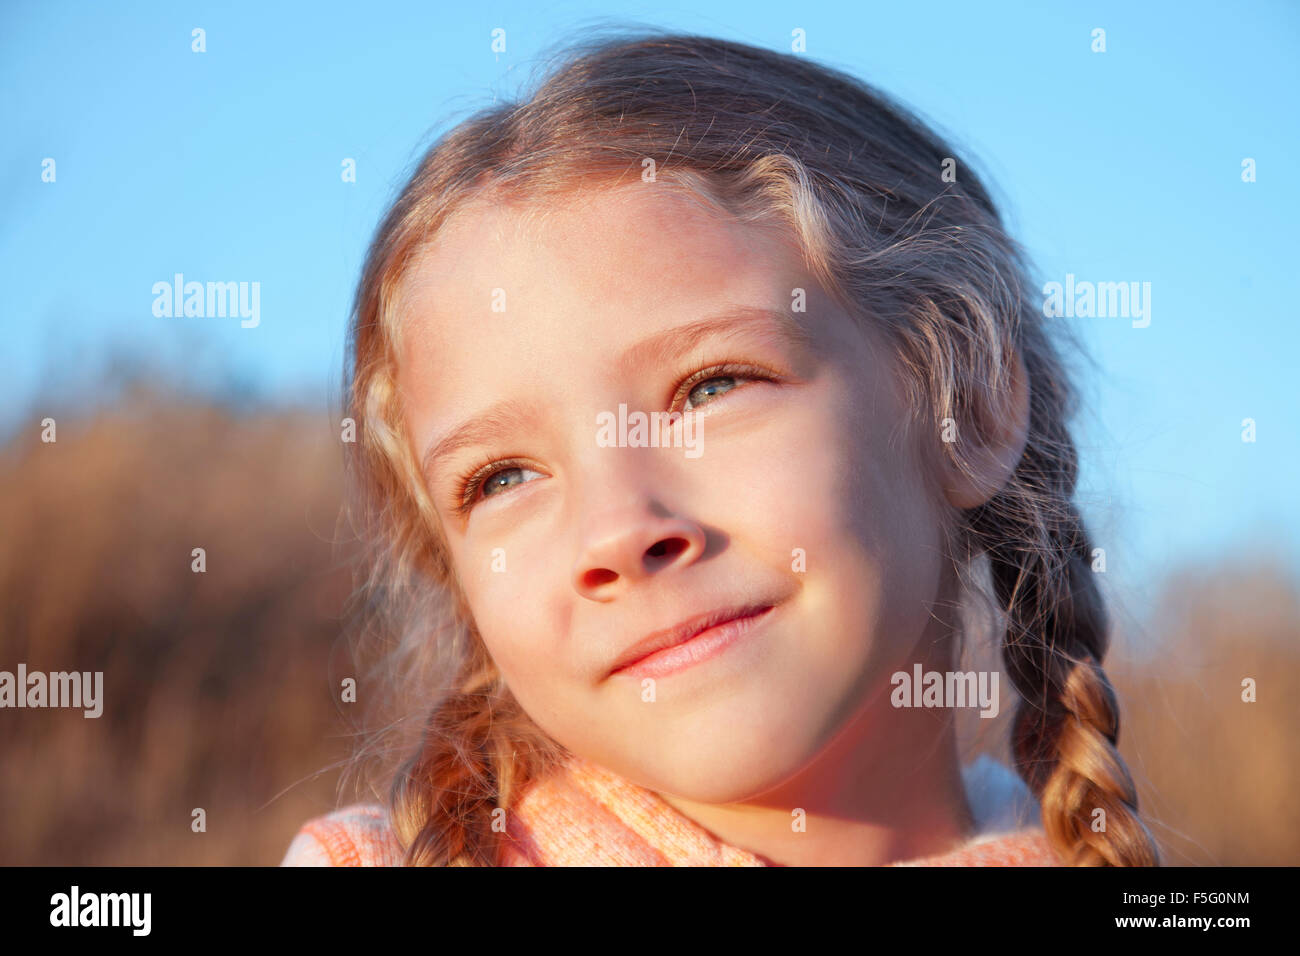 Portrait of a girl with pigtails closeup outdoors Stock Photo